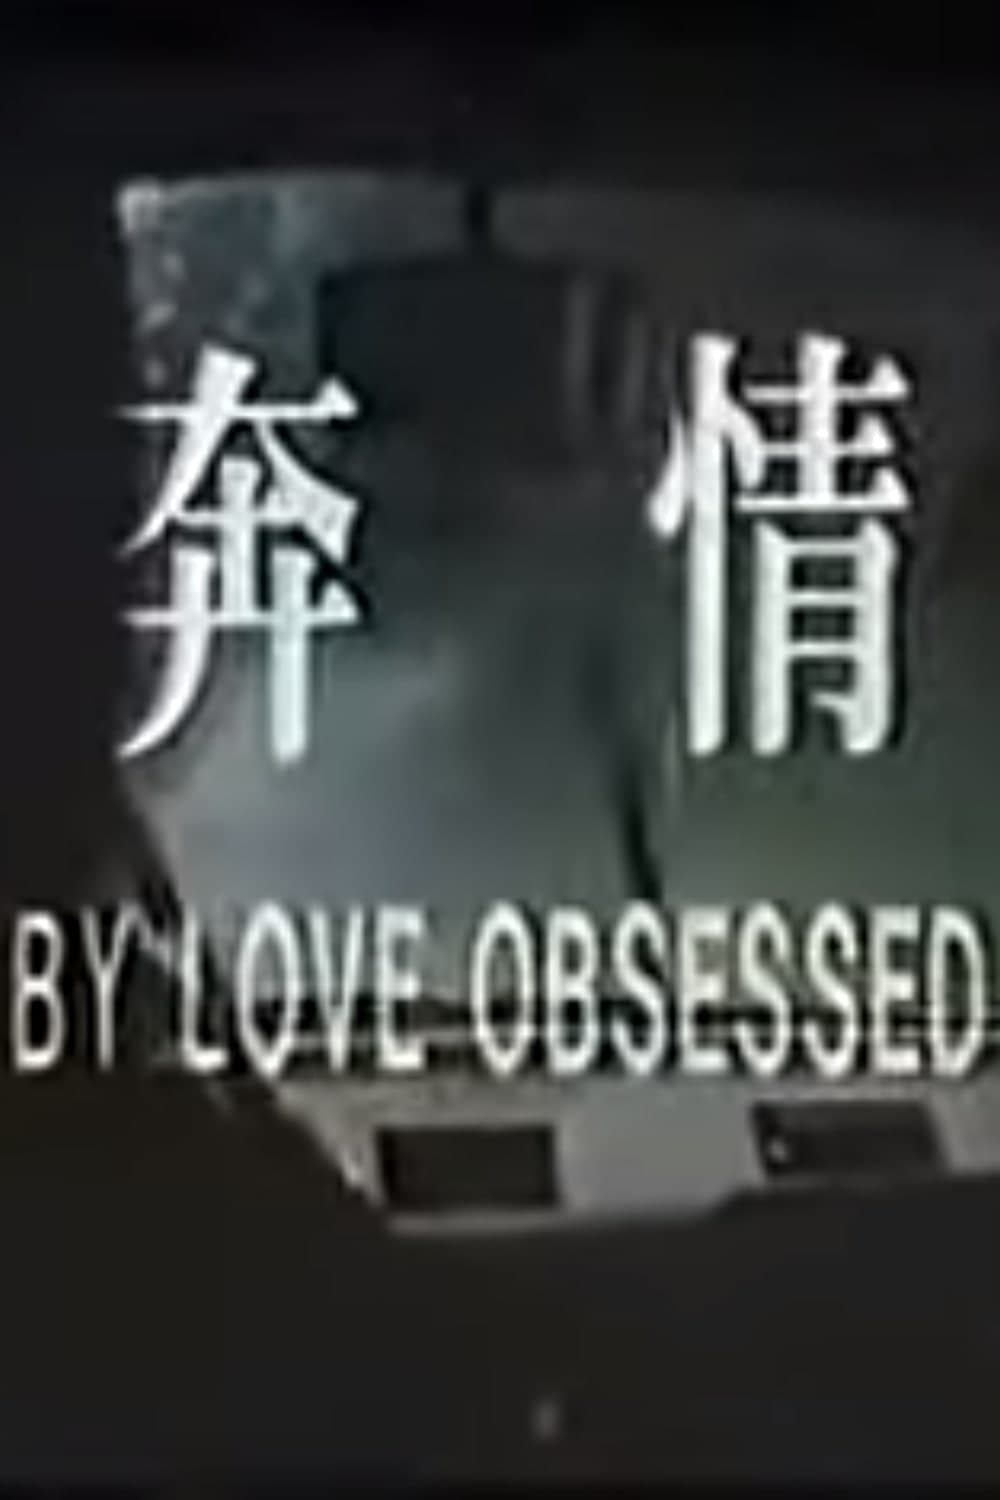 By Love Obsessed